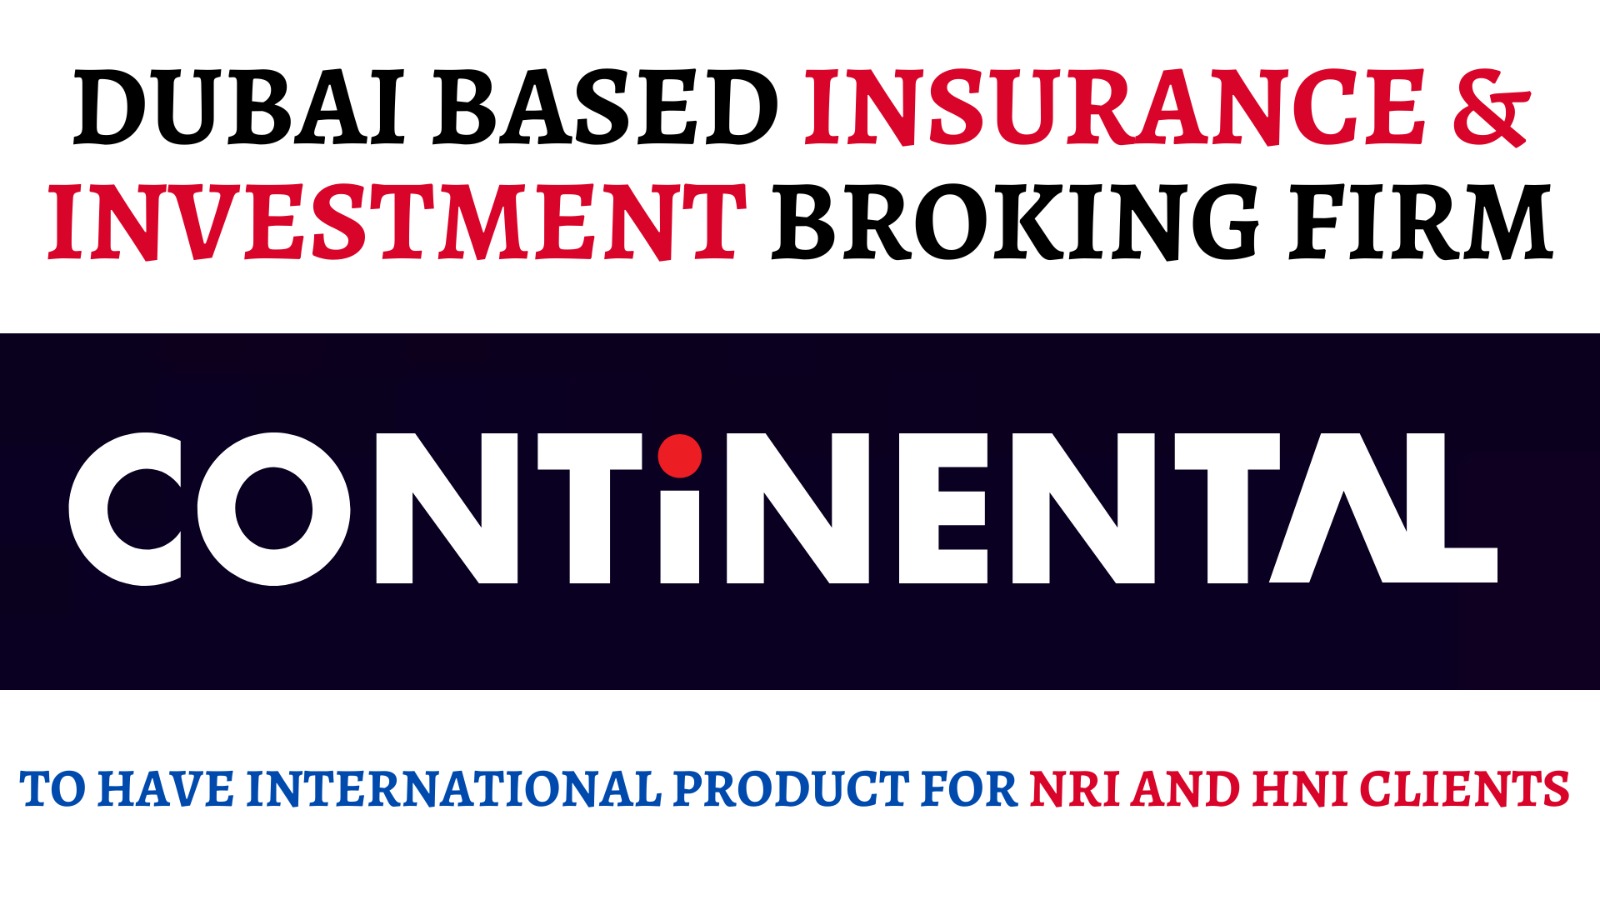 CONTINENTAL – DUBAI BASED INSURANCE & INVESTMENT BROKING FIRM TO HAVE INTERNATIONAL PRODUCT FOR NRI & HNI CLIENTS